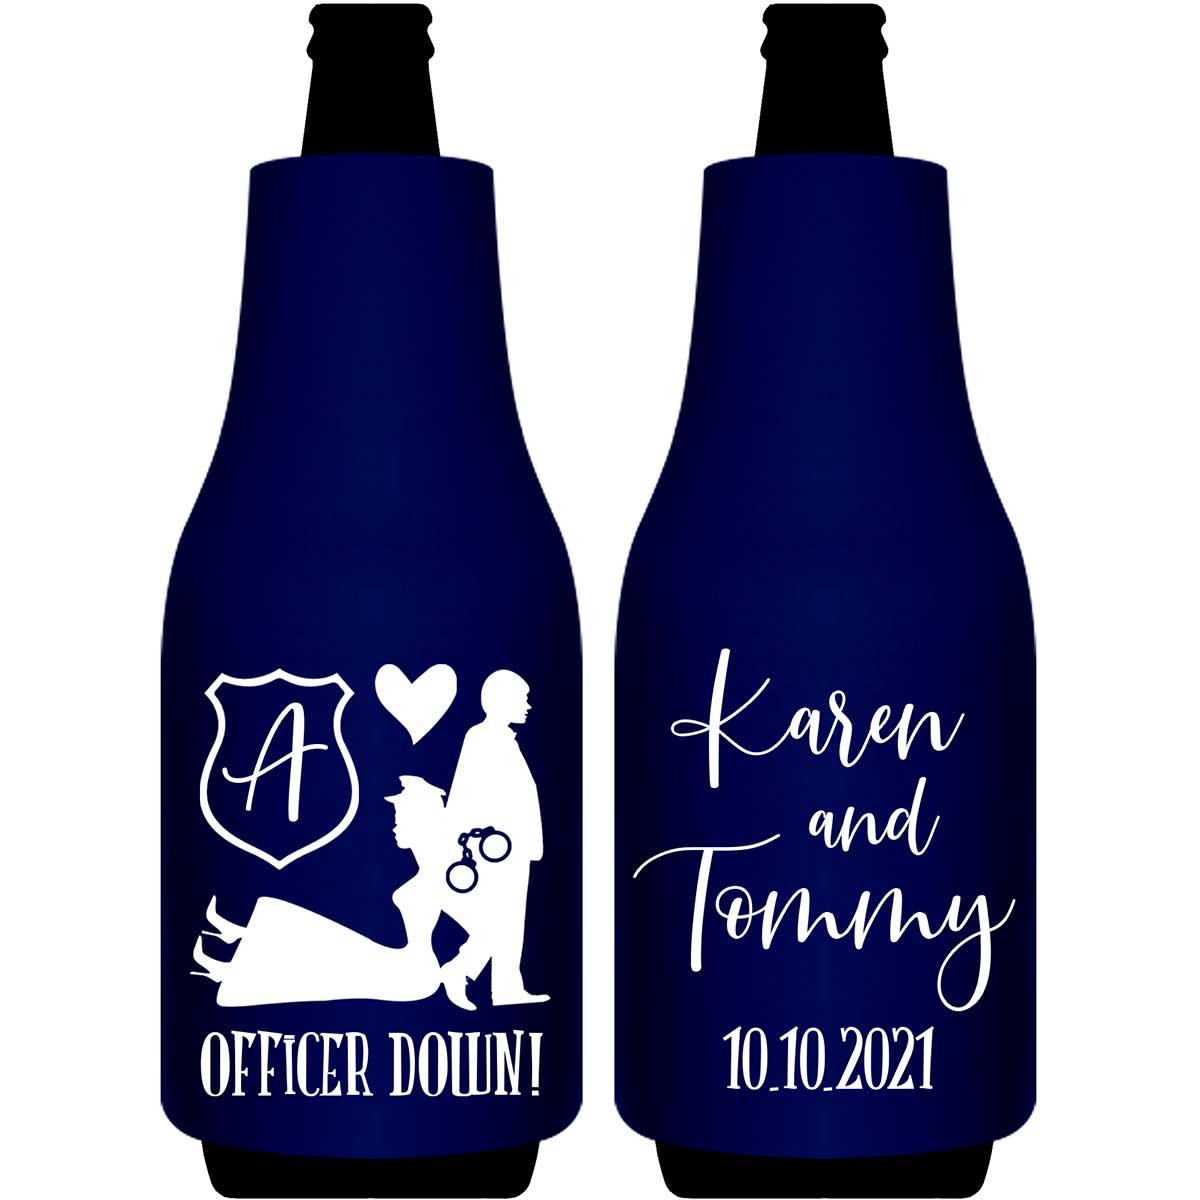 Officer Down 1B Policewoman Wedding Foldable Bottle Sleeve Koozies Wedding Gifts for Guests